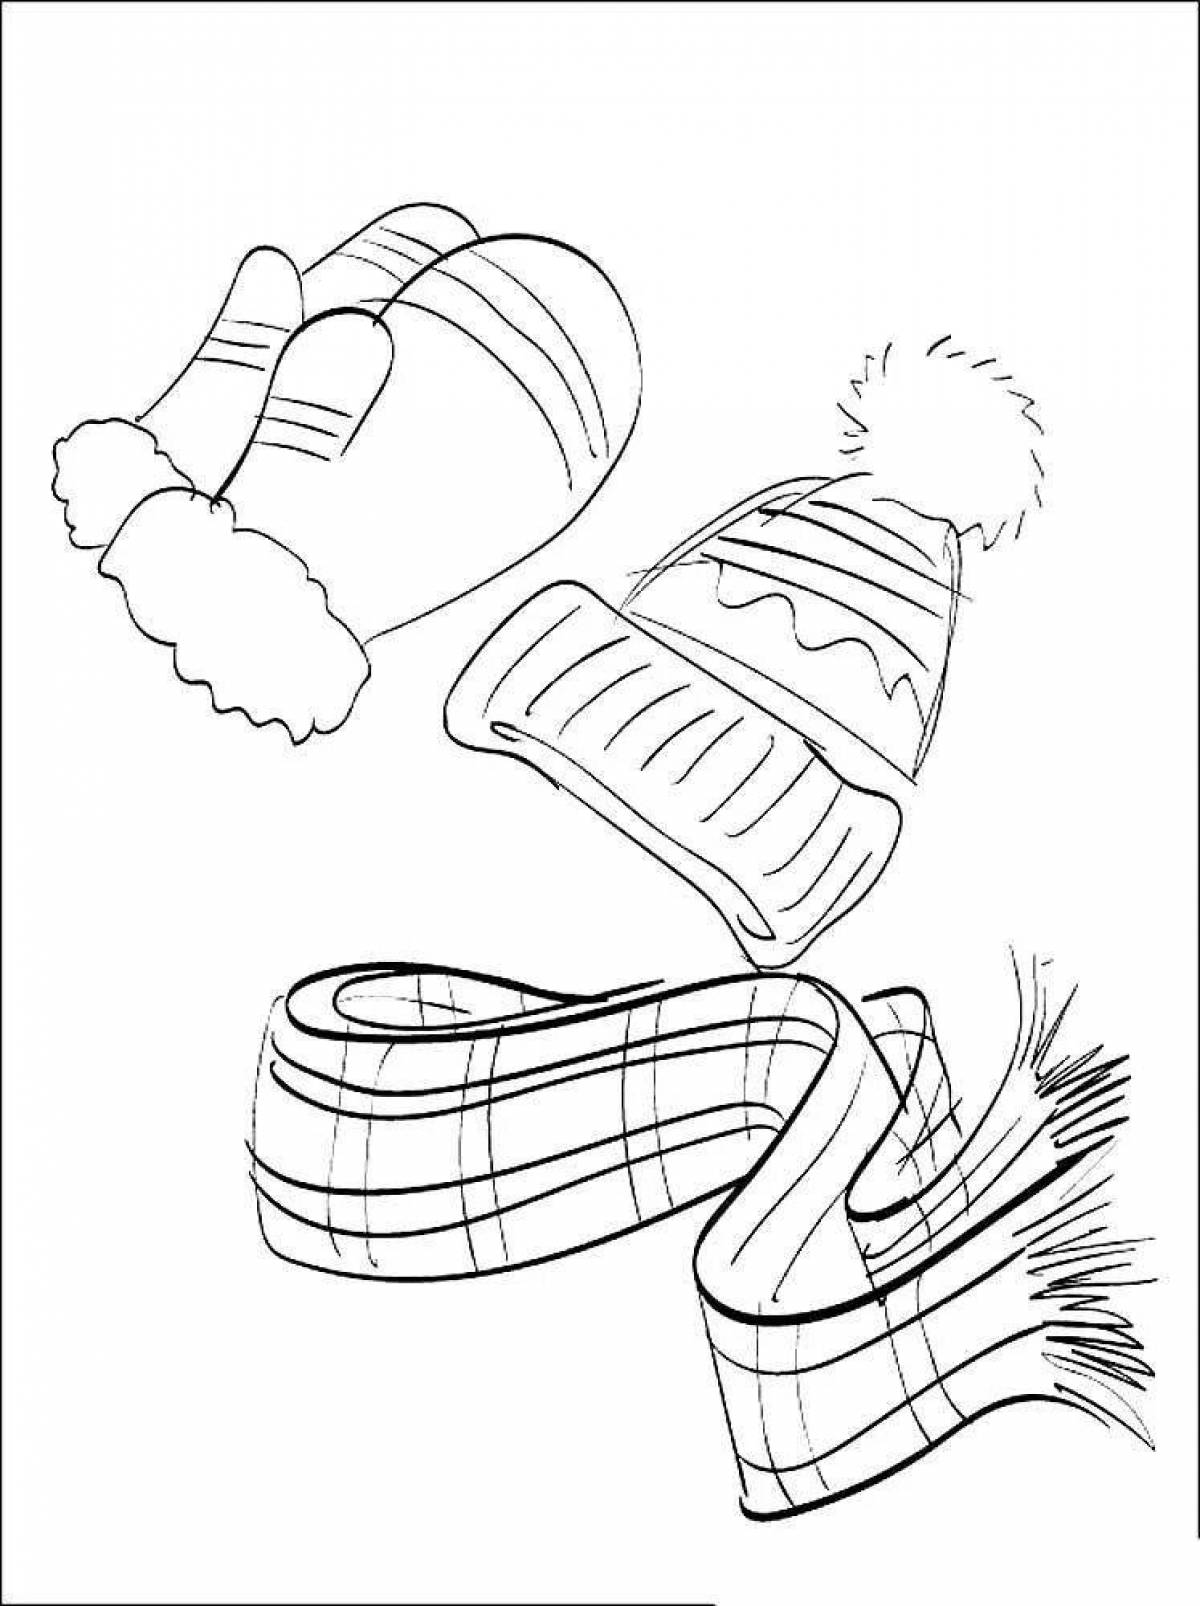 Coloring page cute scarf and hat